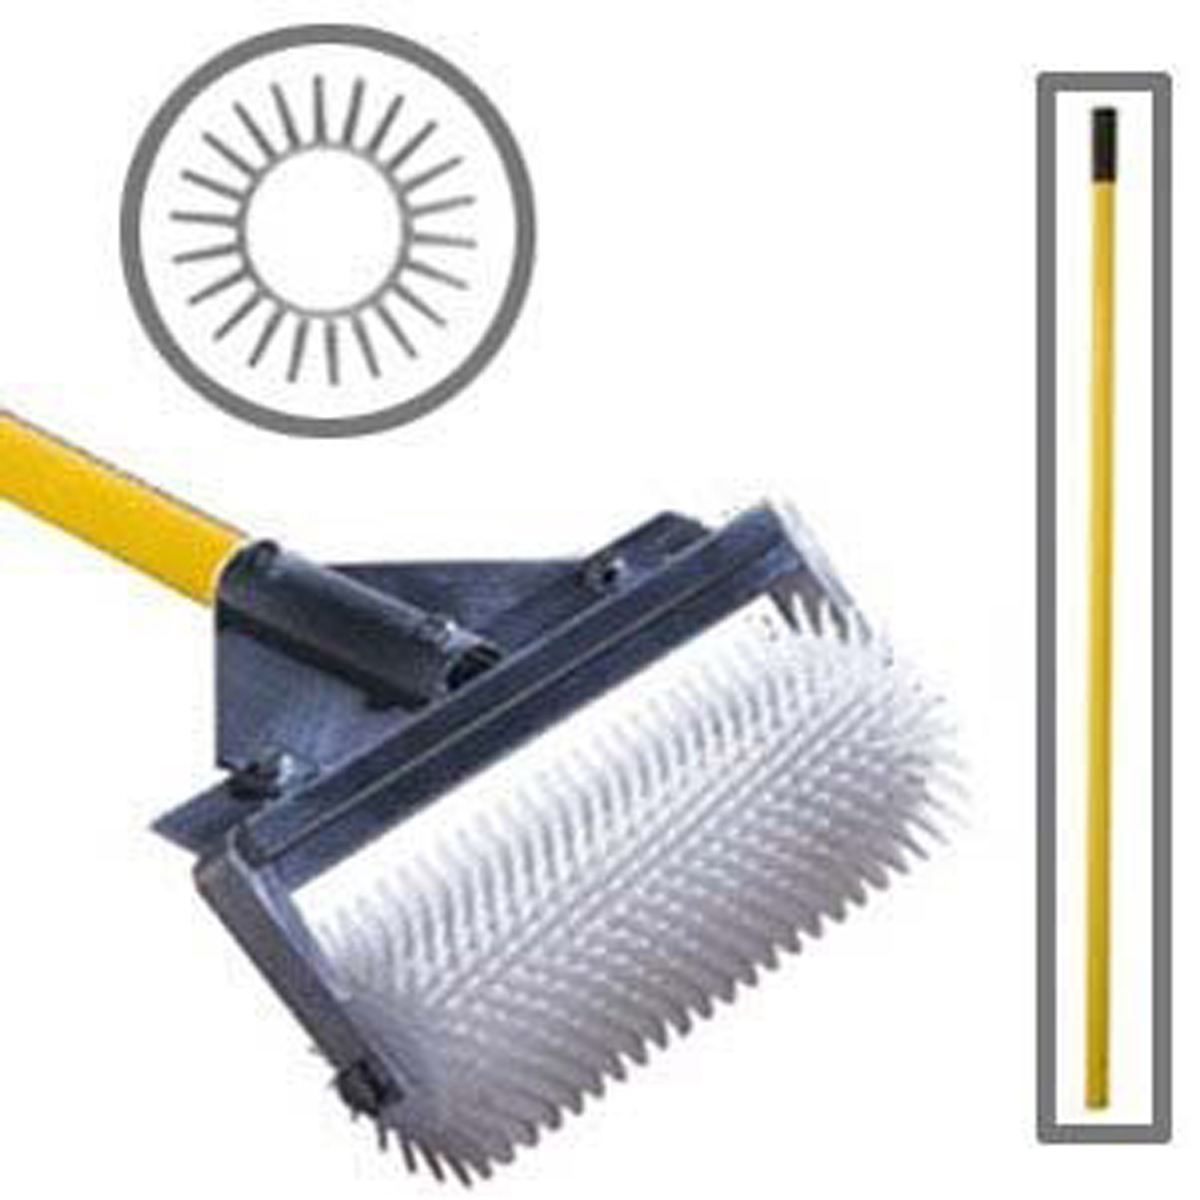 Various Head Width: 9-48 and Handle with Replacement Spiked Roller Midwest Rake Seymour Spiked Roller with 13/16 Super Sharp Spikes Various Head Width: 9-48 and Handle with Replacement Spiked Roller Seymour Midwest BISS 59618